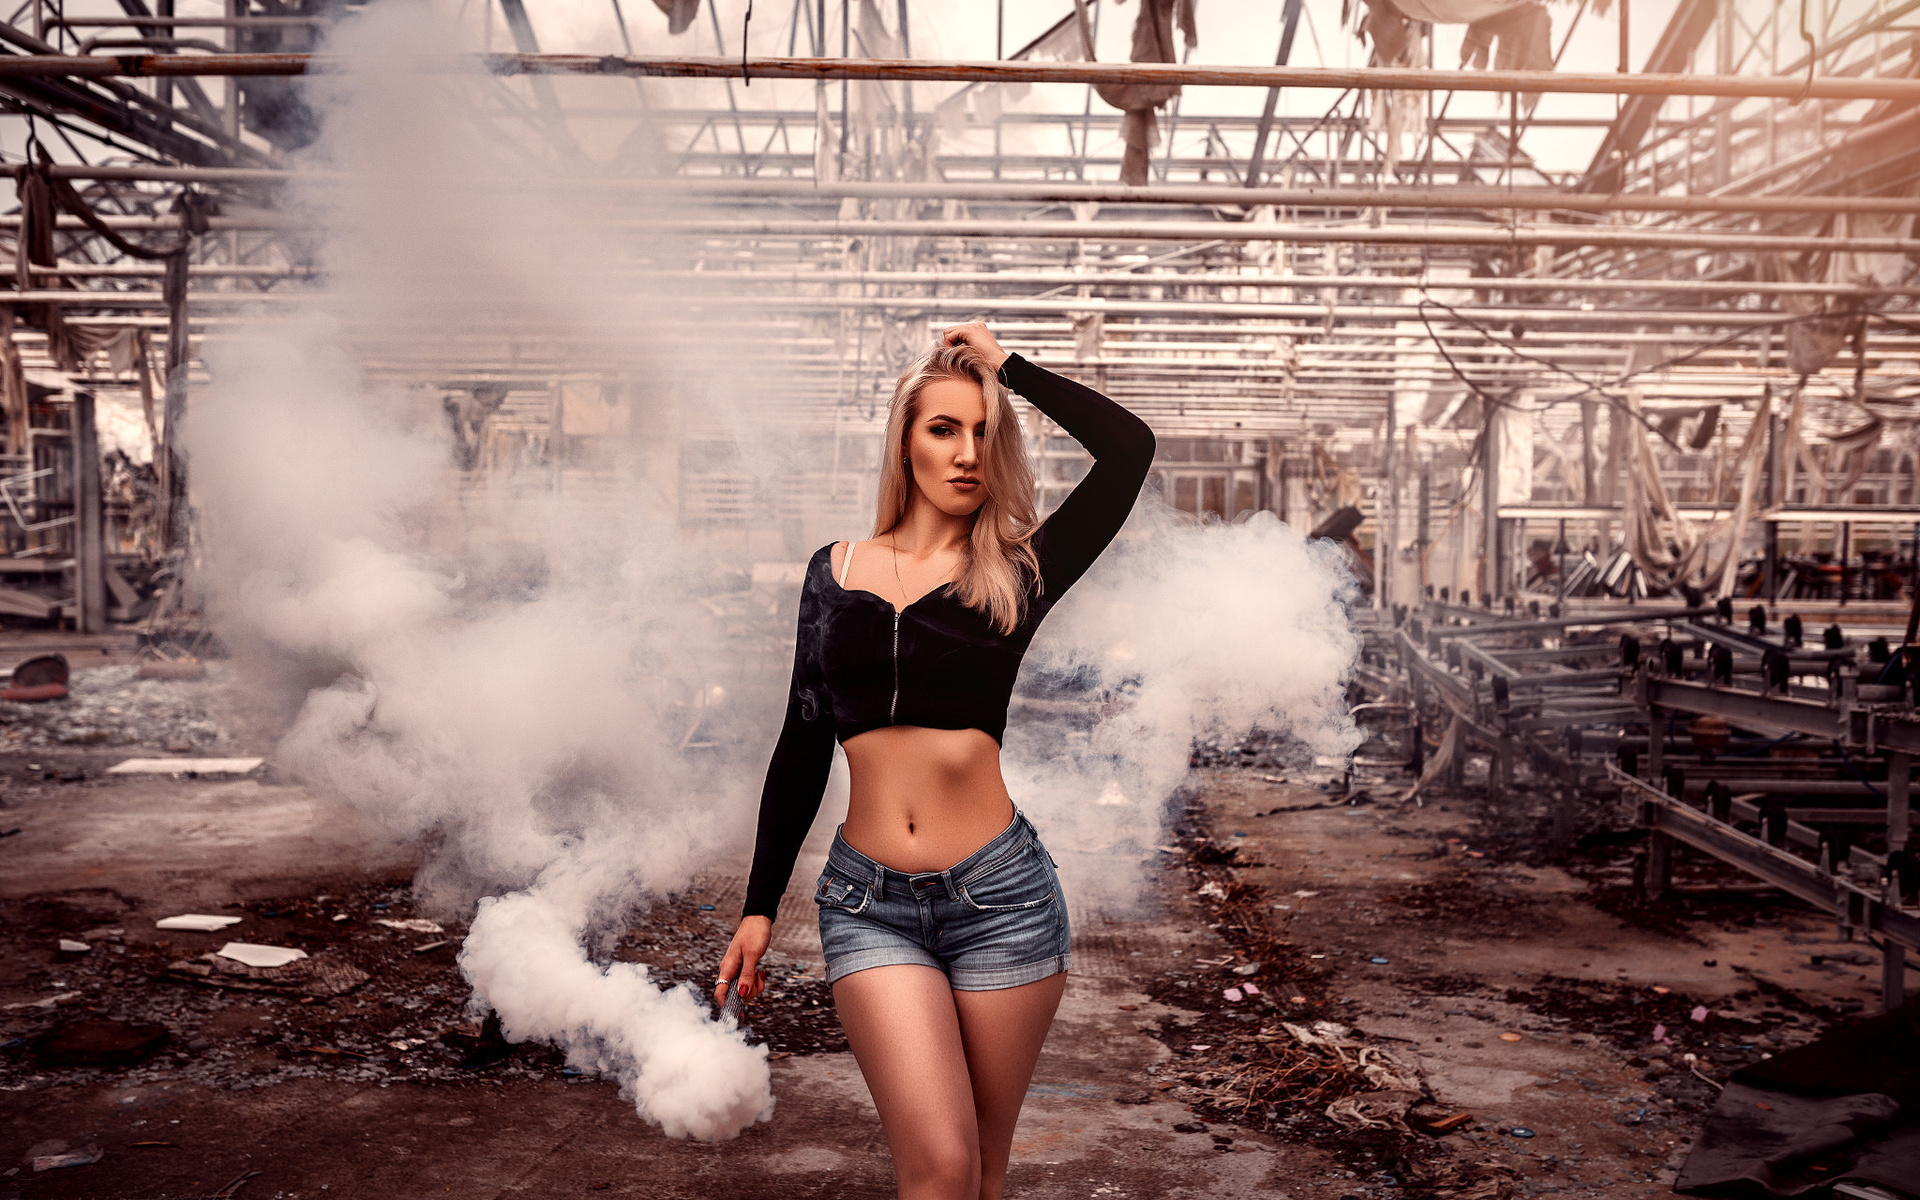 women, blonde, brunette, smoke, belly, red nails, jean shorts, abandoned, ribs